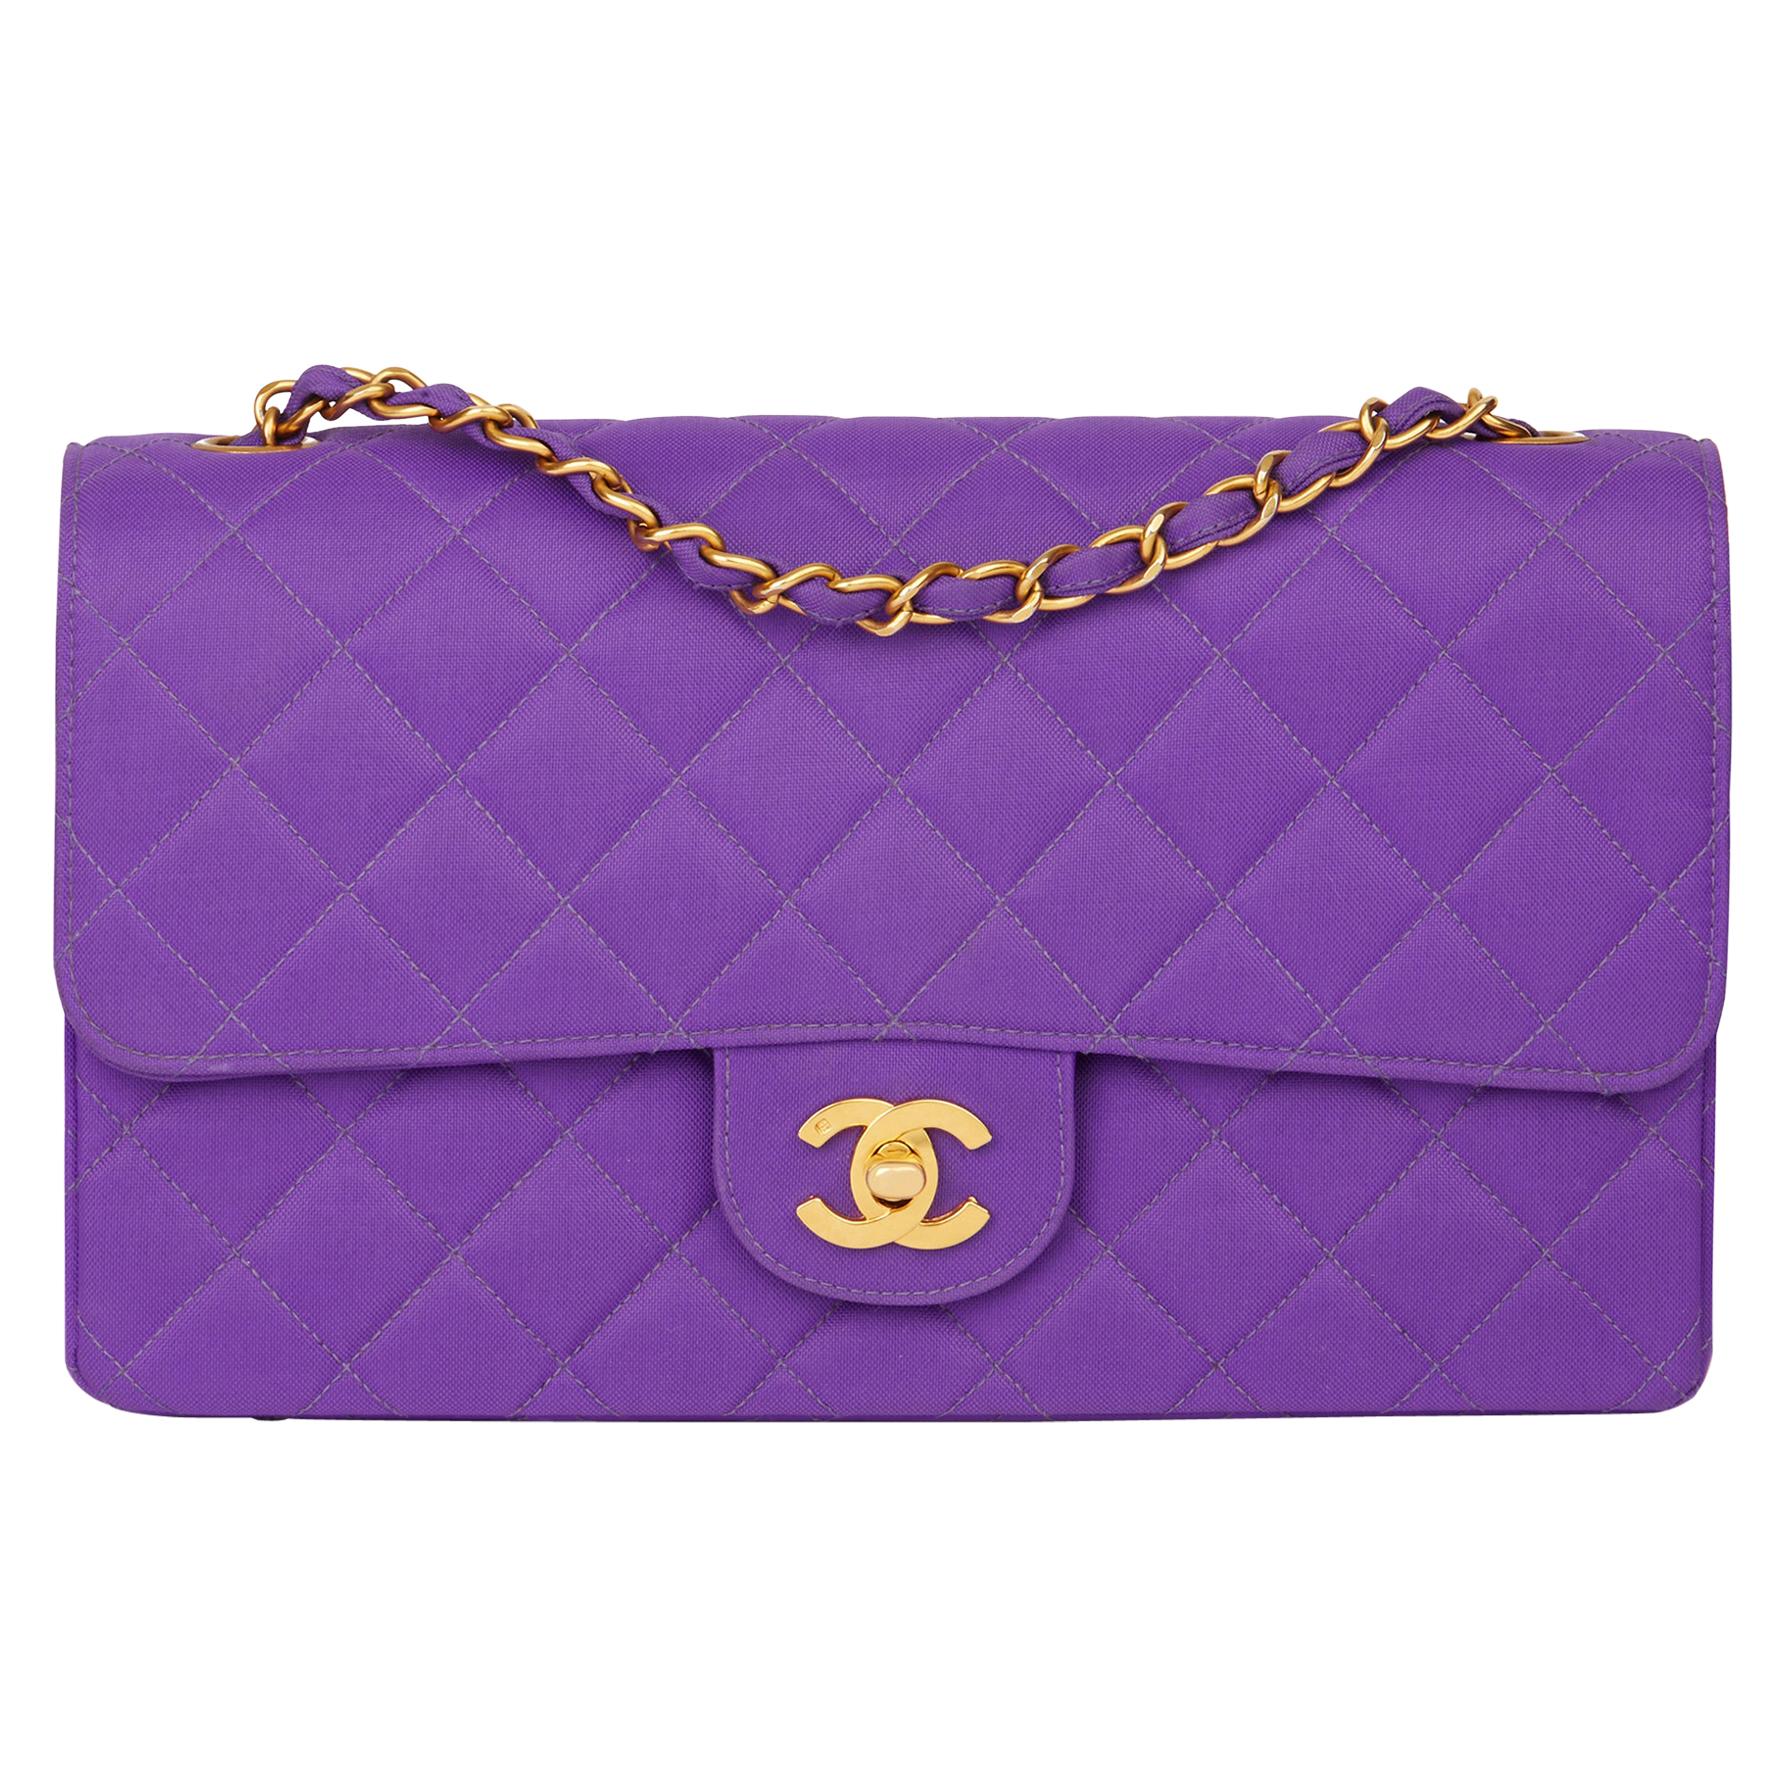 1996 Chanel Purple Quilted Nylon Fabric Vintage Classic Single Flap Bag